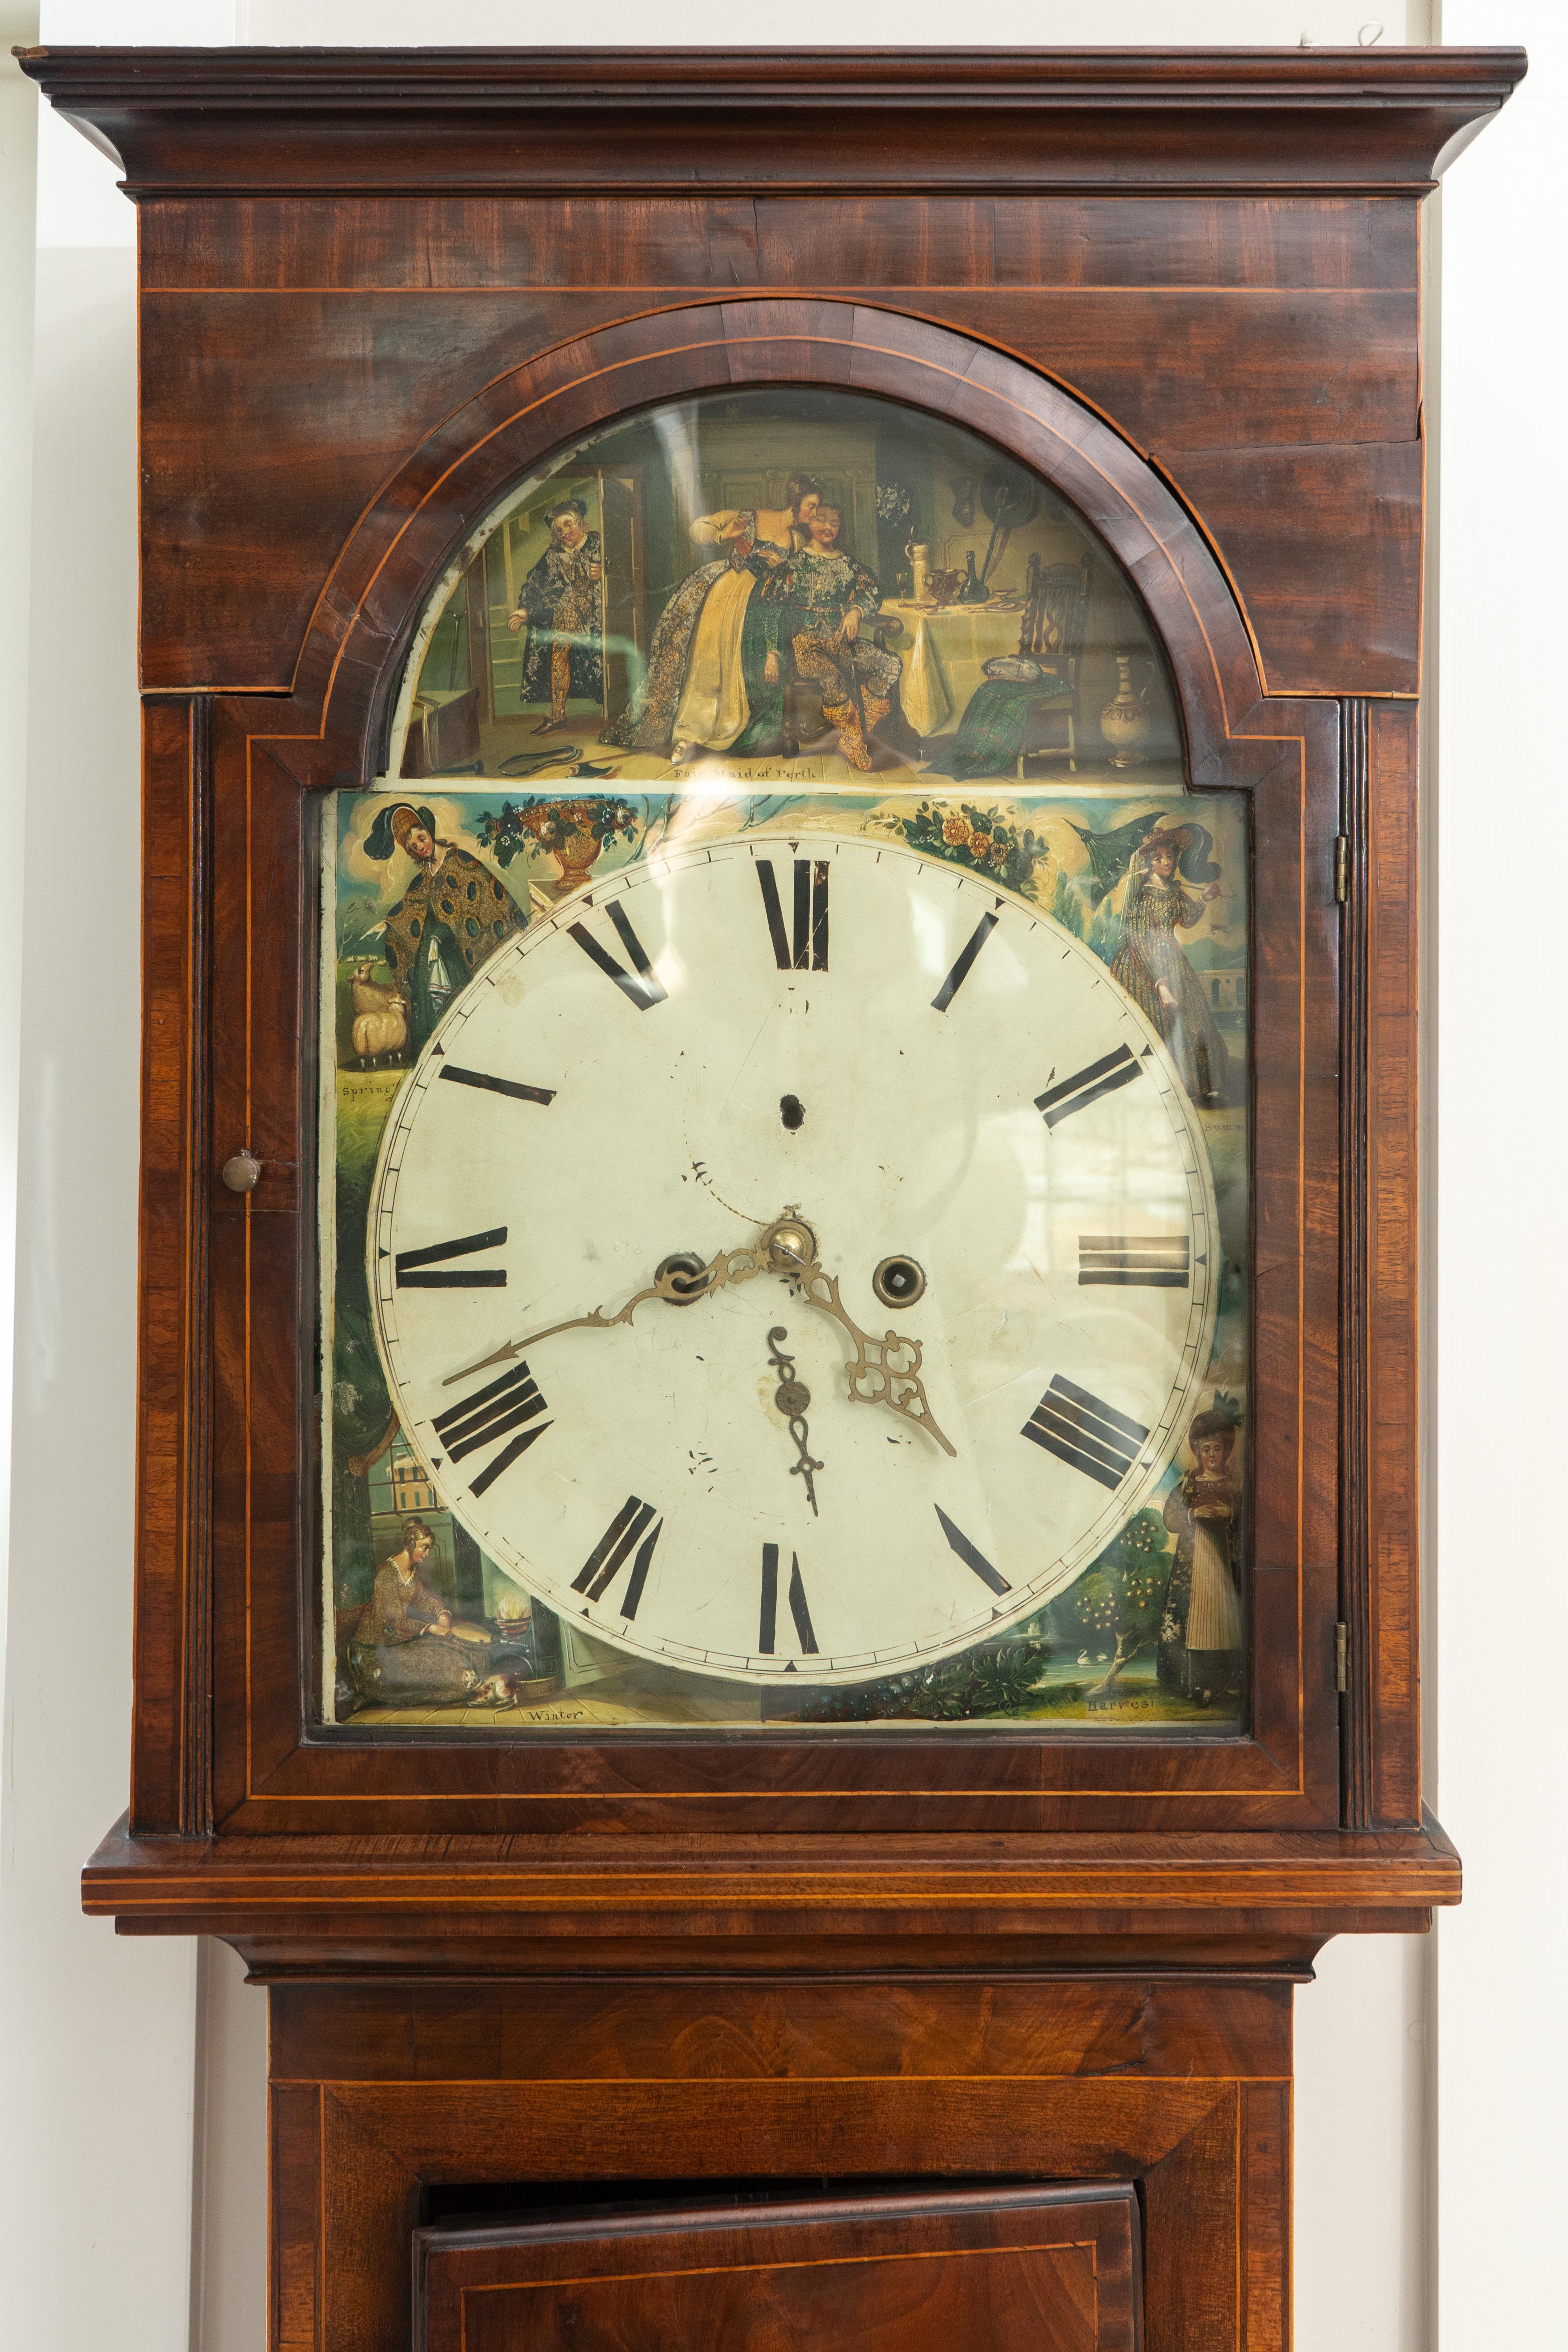 Scottish Grandfather clock:

Clock face painted with settings of the Fair Maid of Perth during the four seasons.

Measures:  21